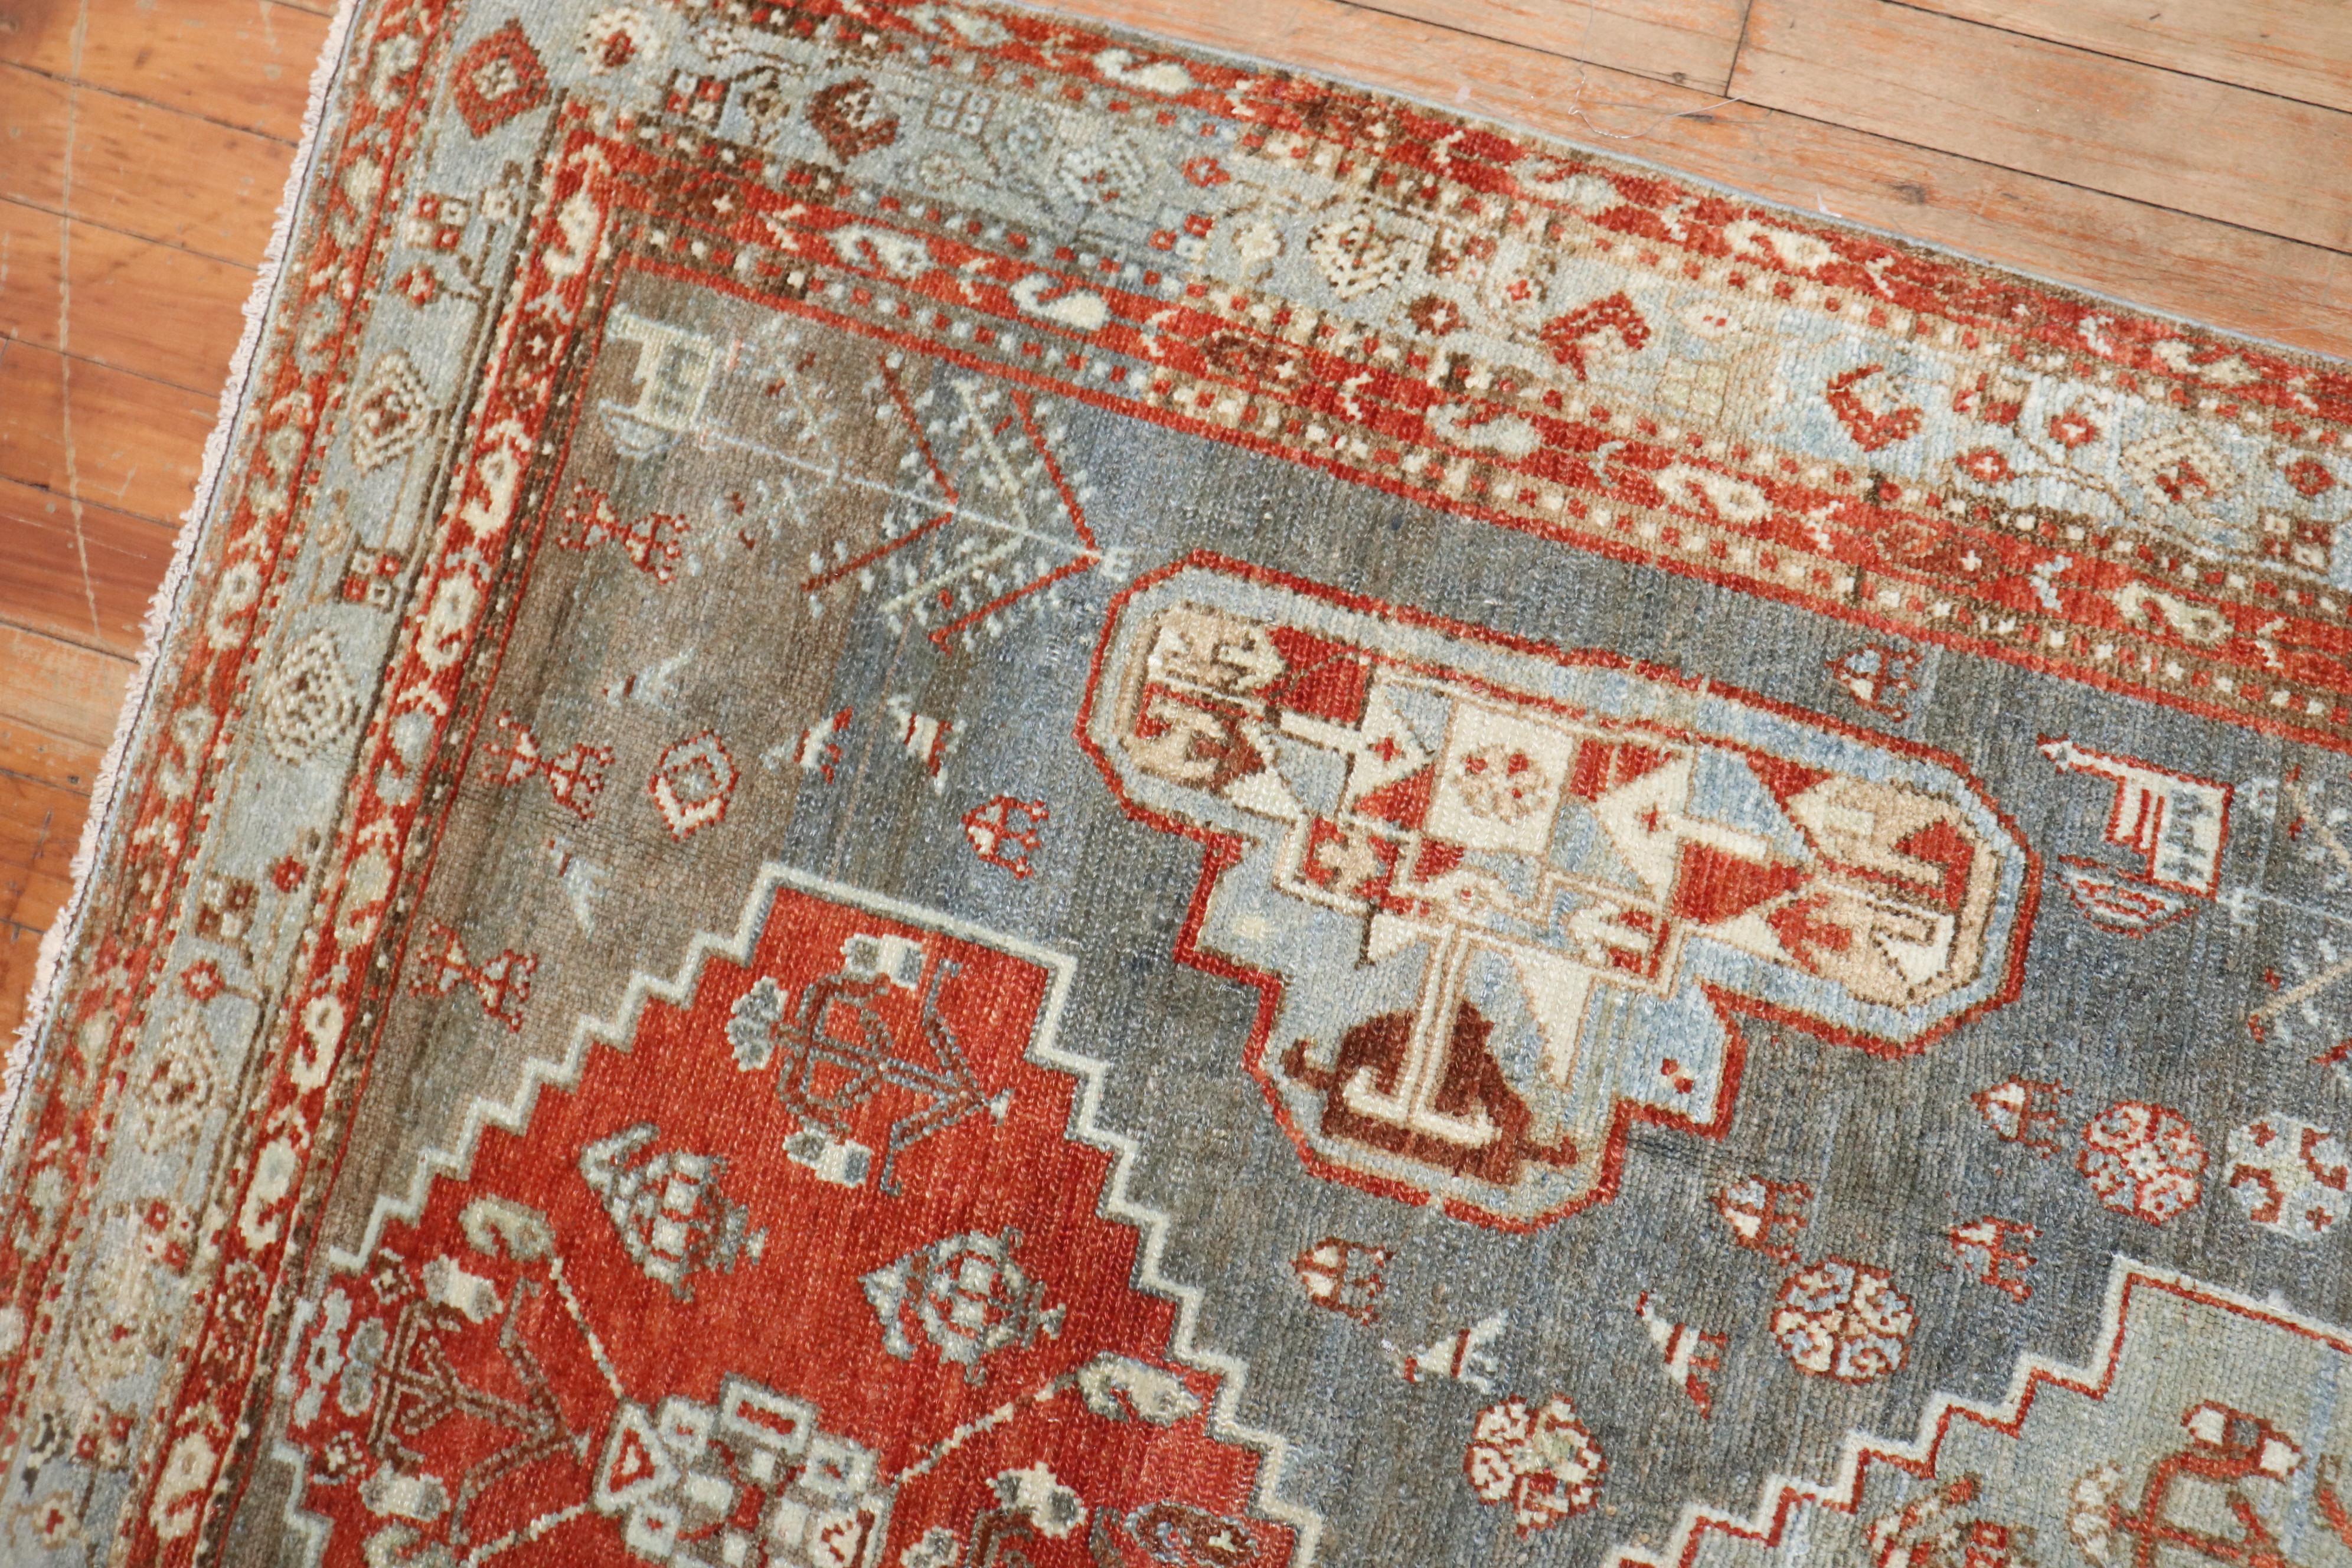 An accent Size Persian Malayer Tribal Rug from the 2nd quarter of the 20th century

Measures: 4' x 6'6''